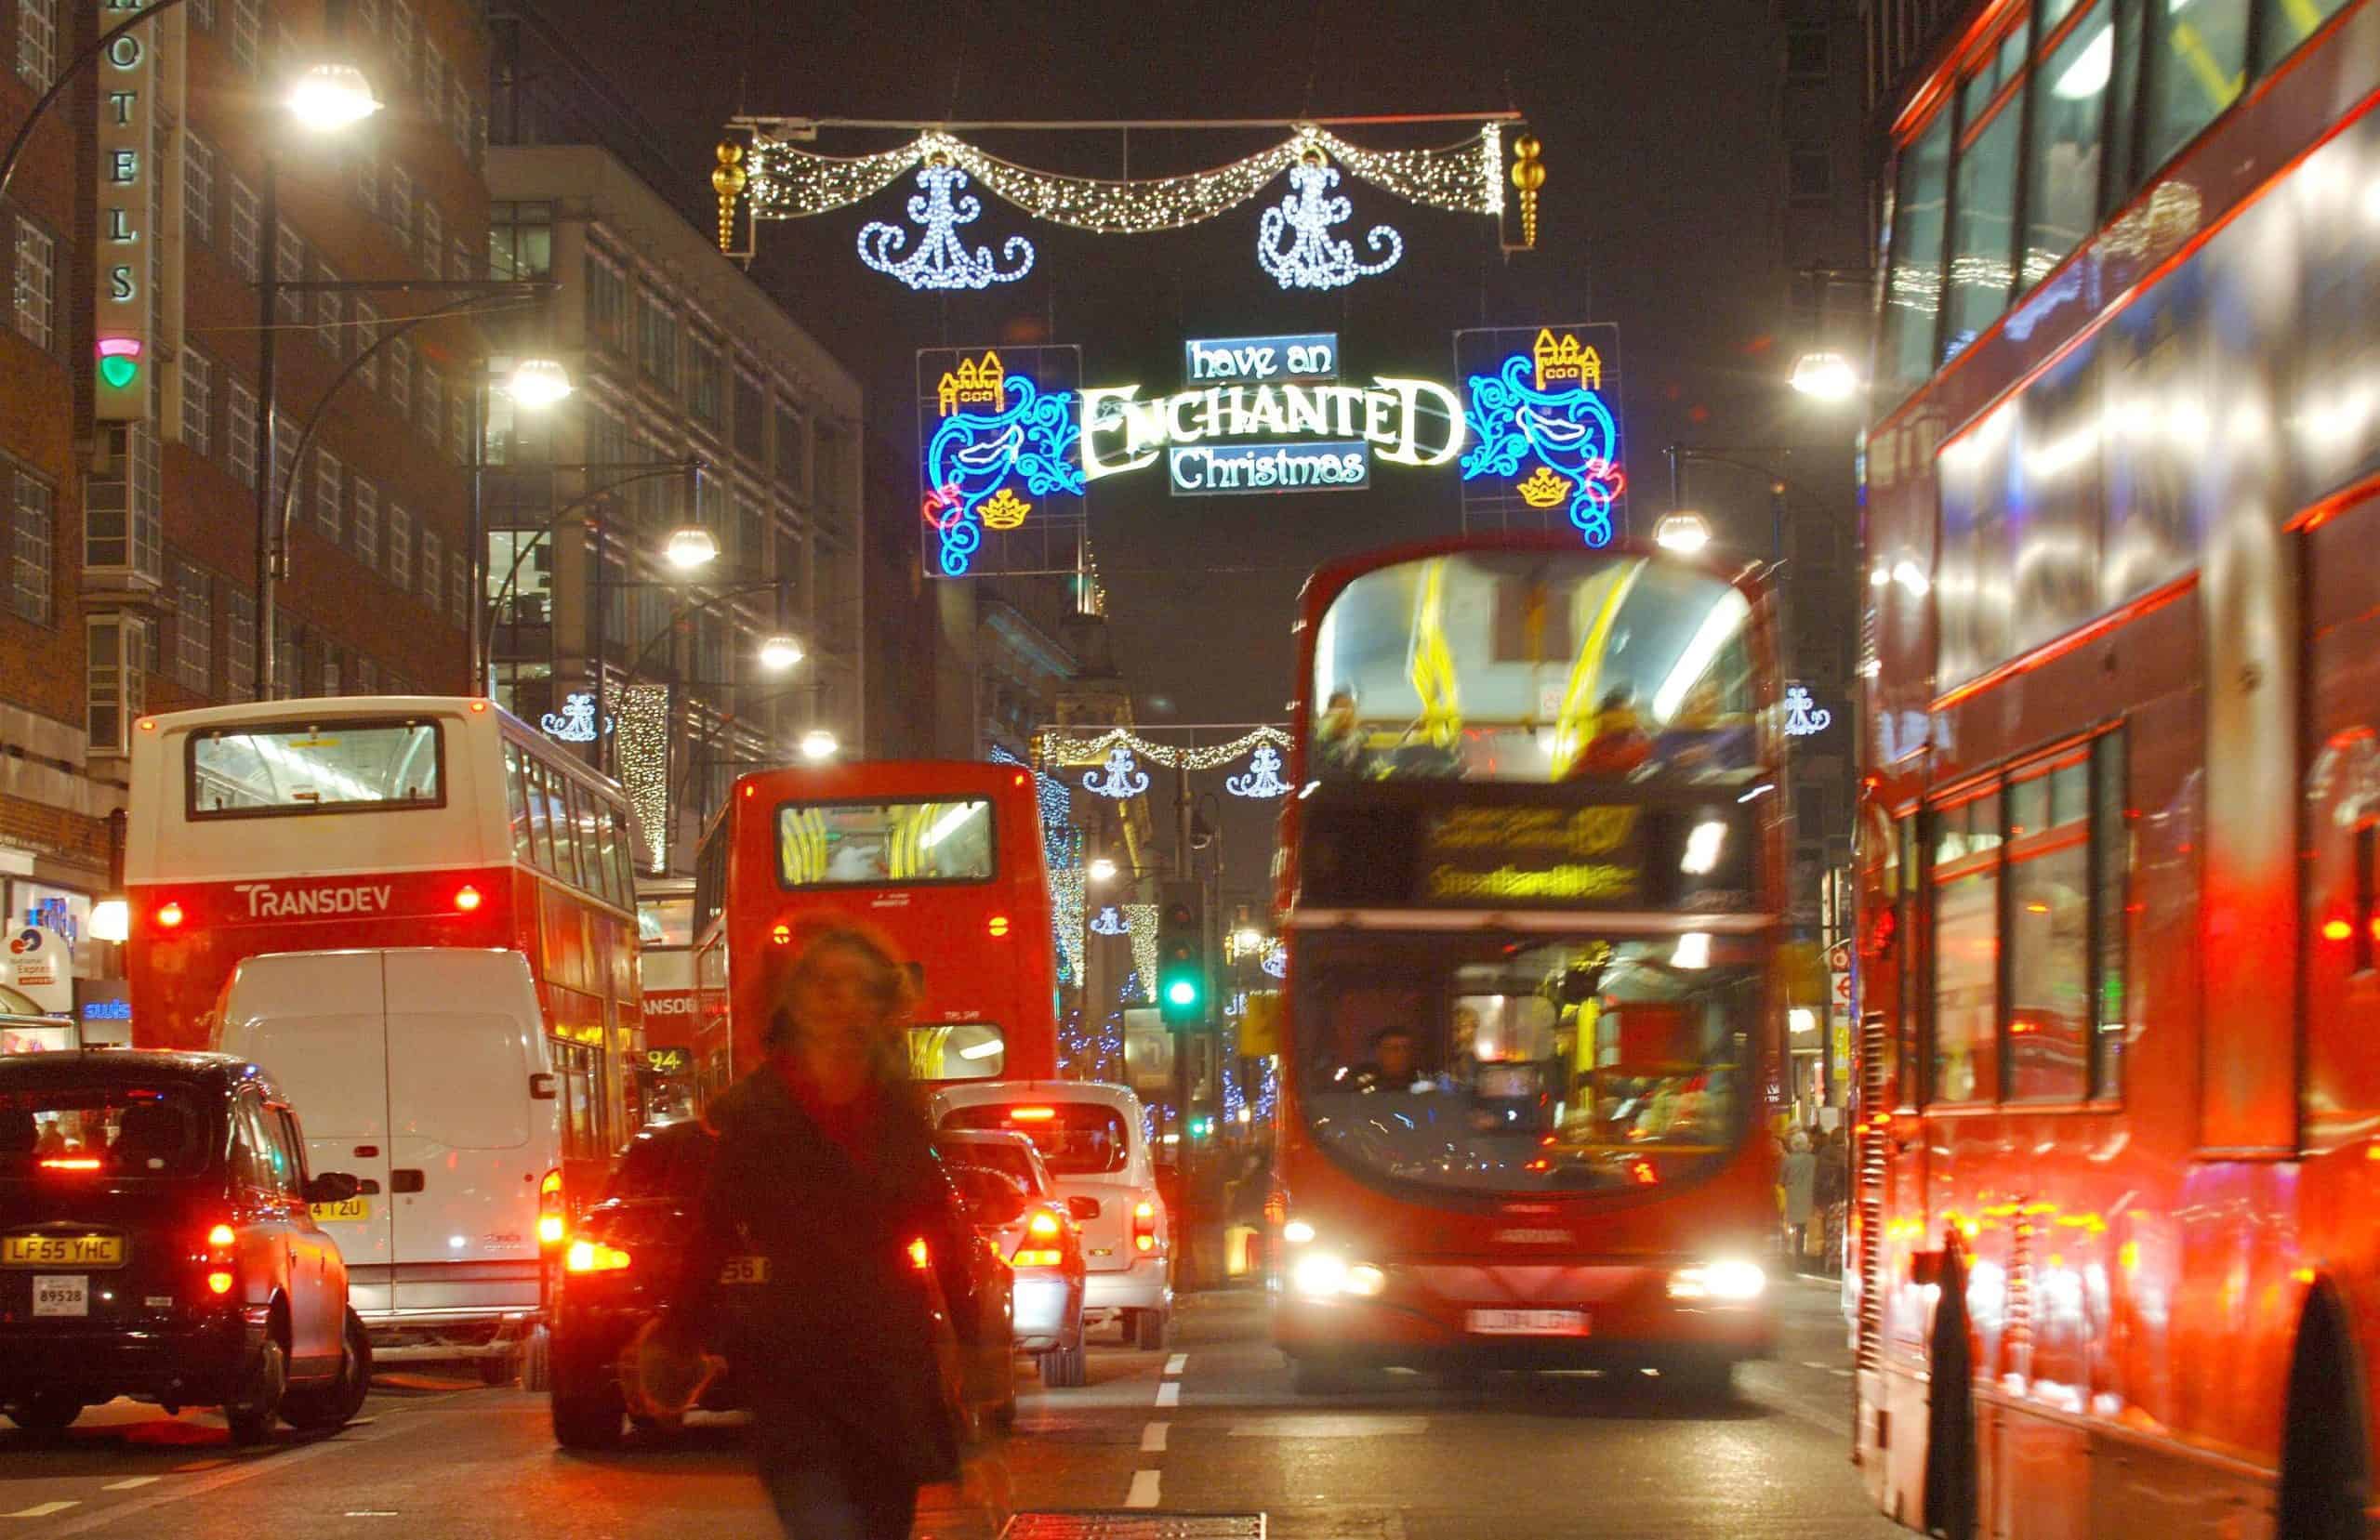 Watch: Men filmed spitting at bus full of Jewish people on Oxford Street